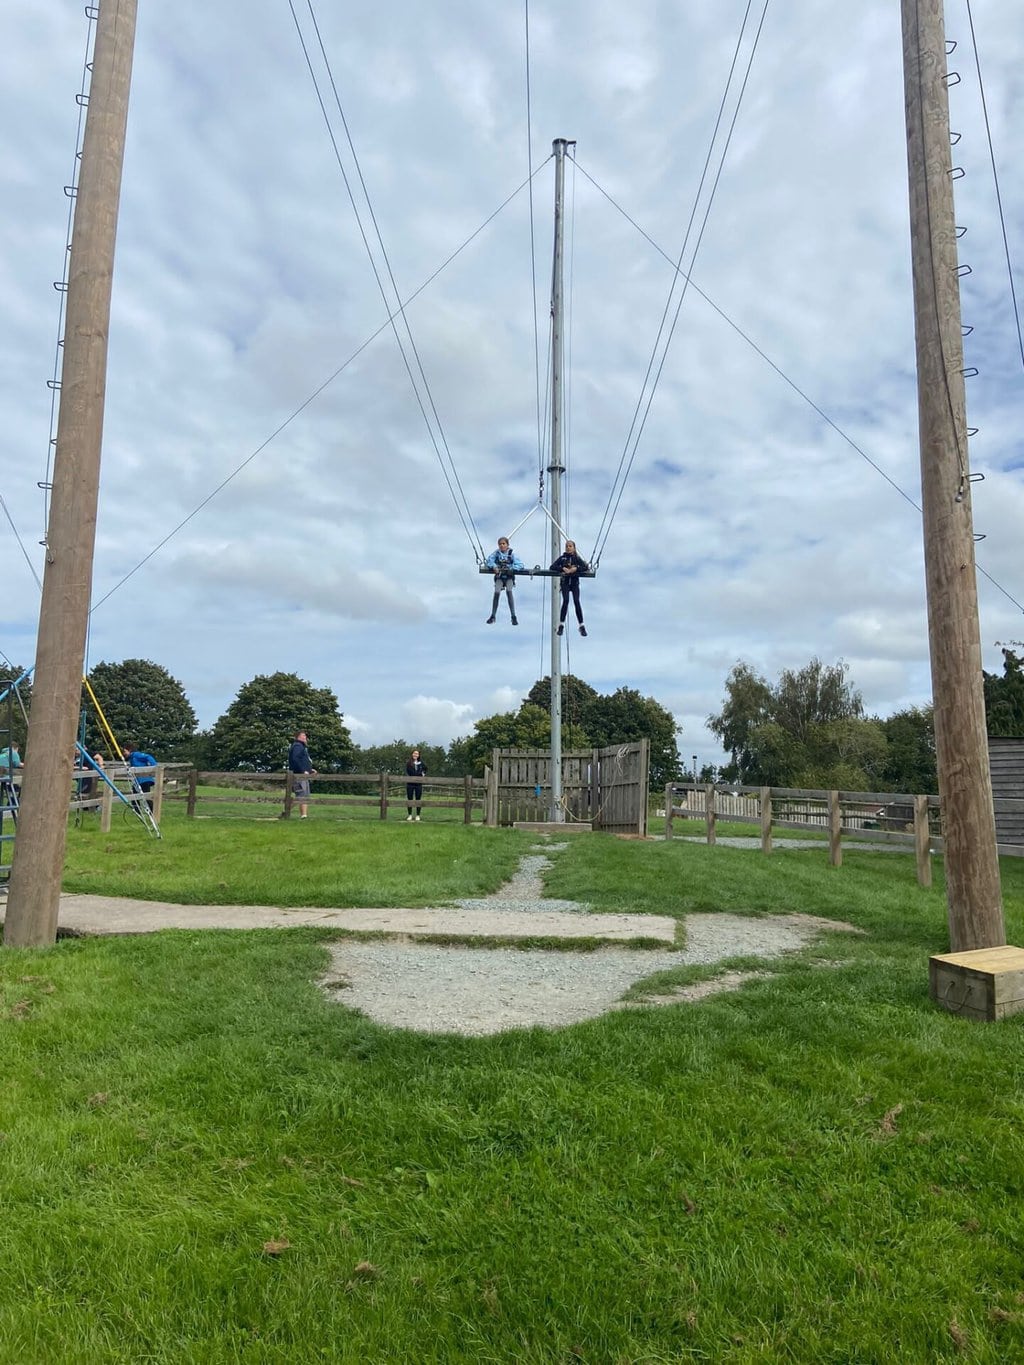 Review of PGL Holiday | Adventure Holiday for Kids